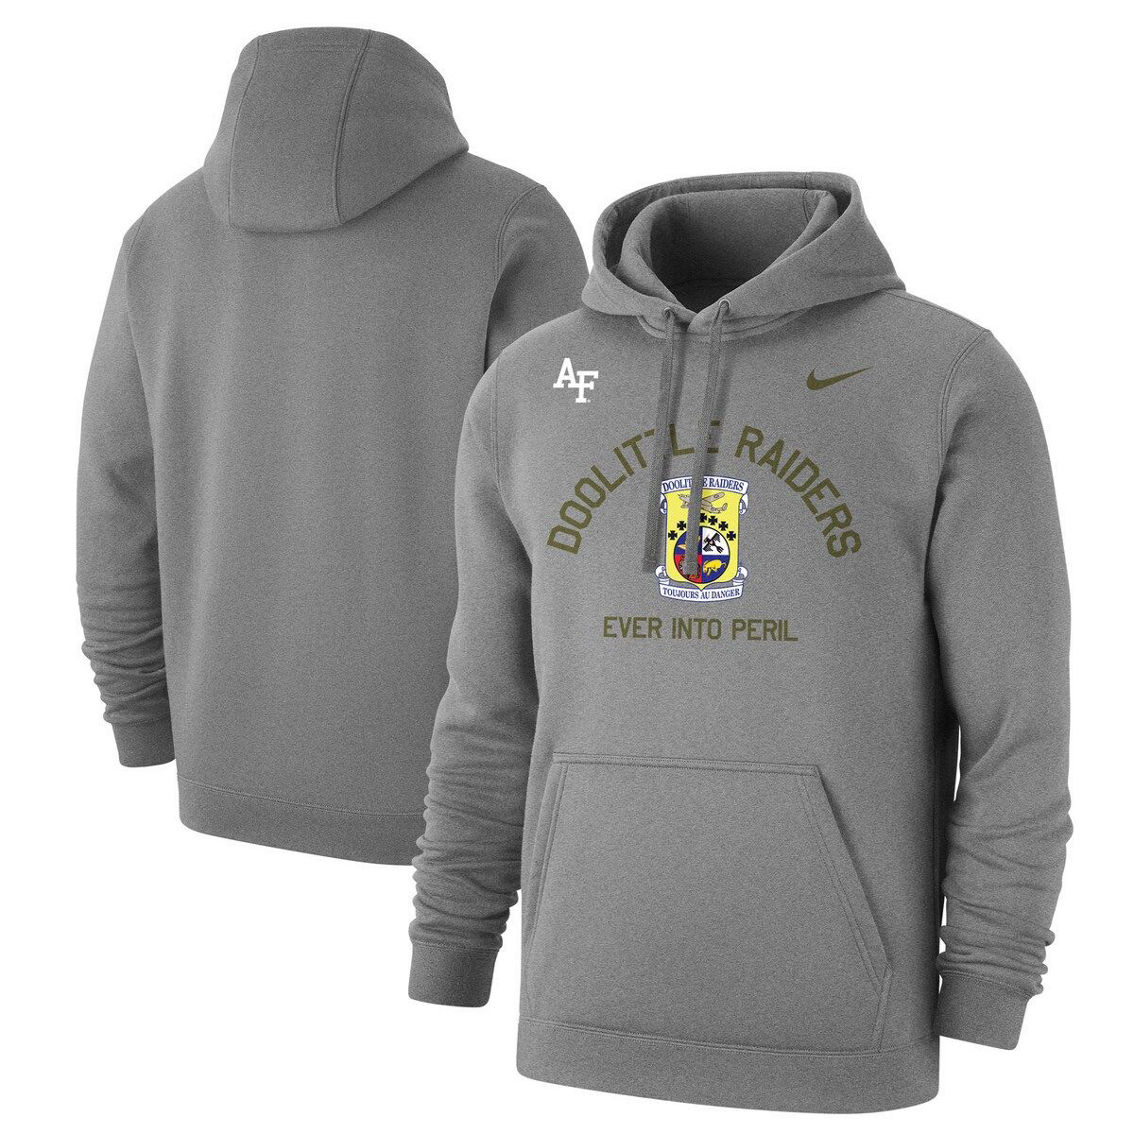 Nike Men's Heather Gray Air Force Falcons Rivalry Badge Club Pullover Hoodie - Image 2 of 4